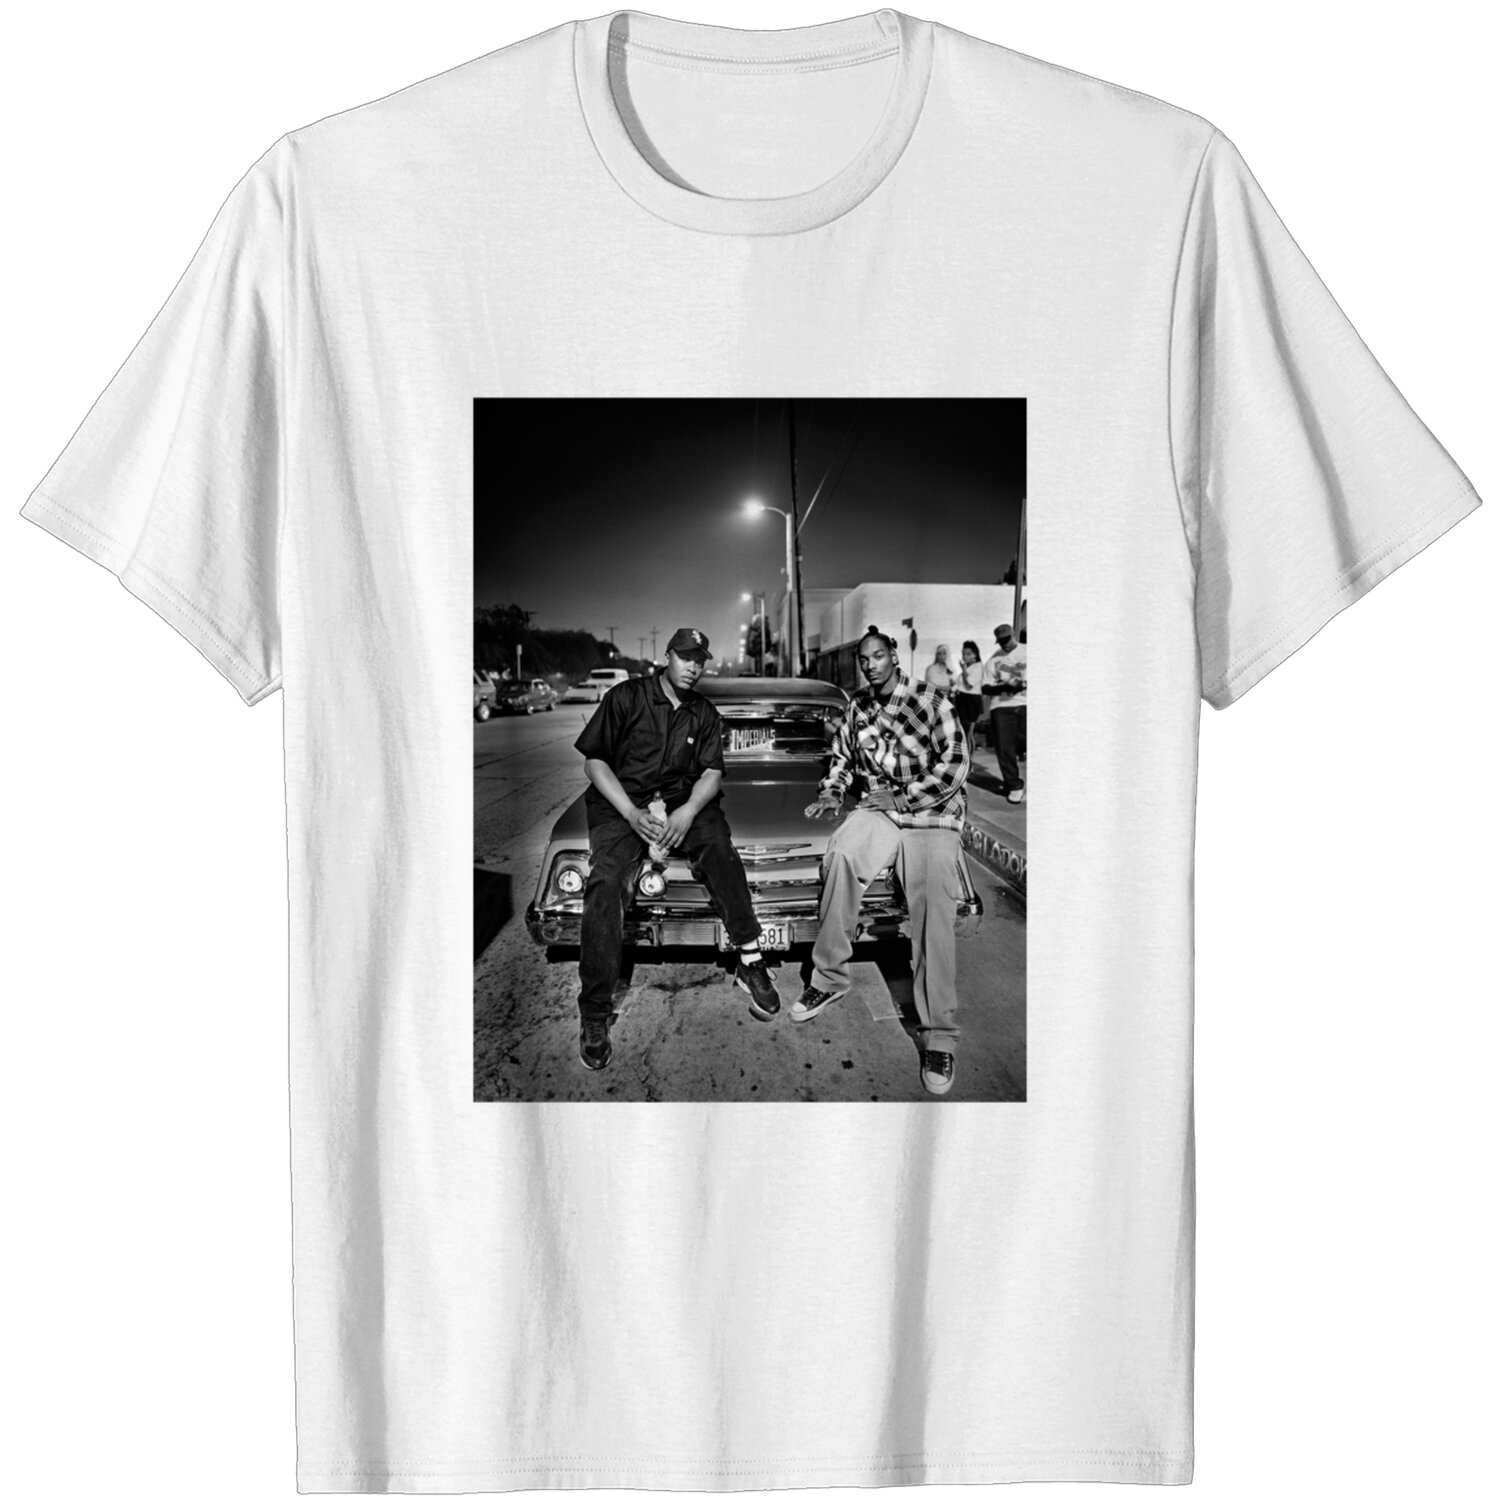 Legends of Hip Hop Vintage Graphic Tee featuring Eminem, Dr. Dre, Ice Cube, and Snoop Dogg DZT01